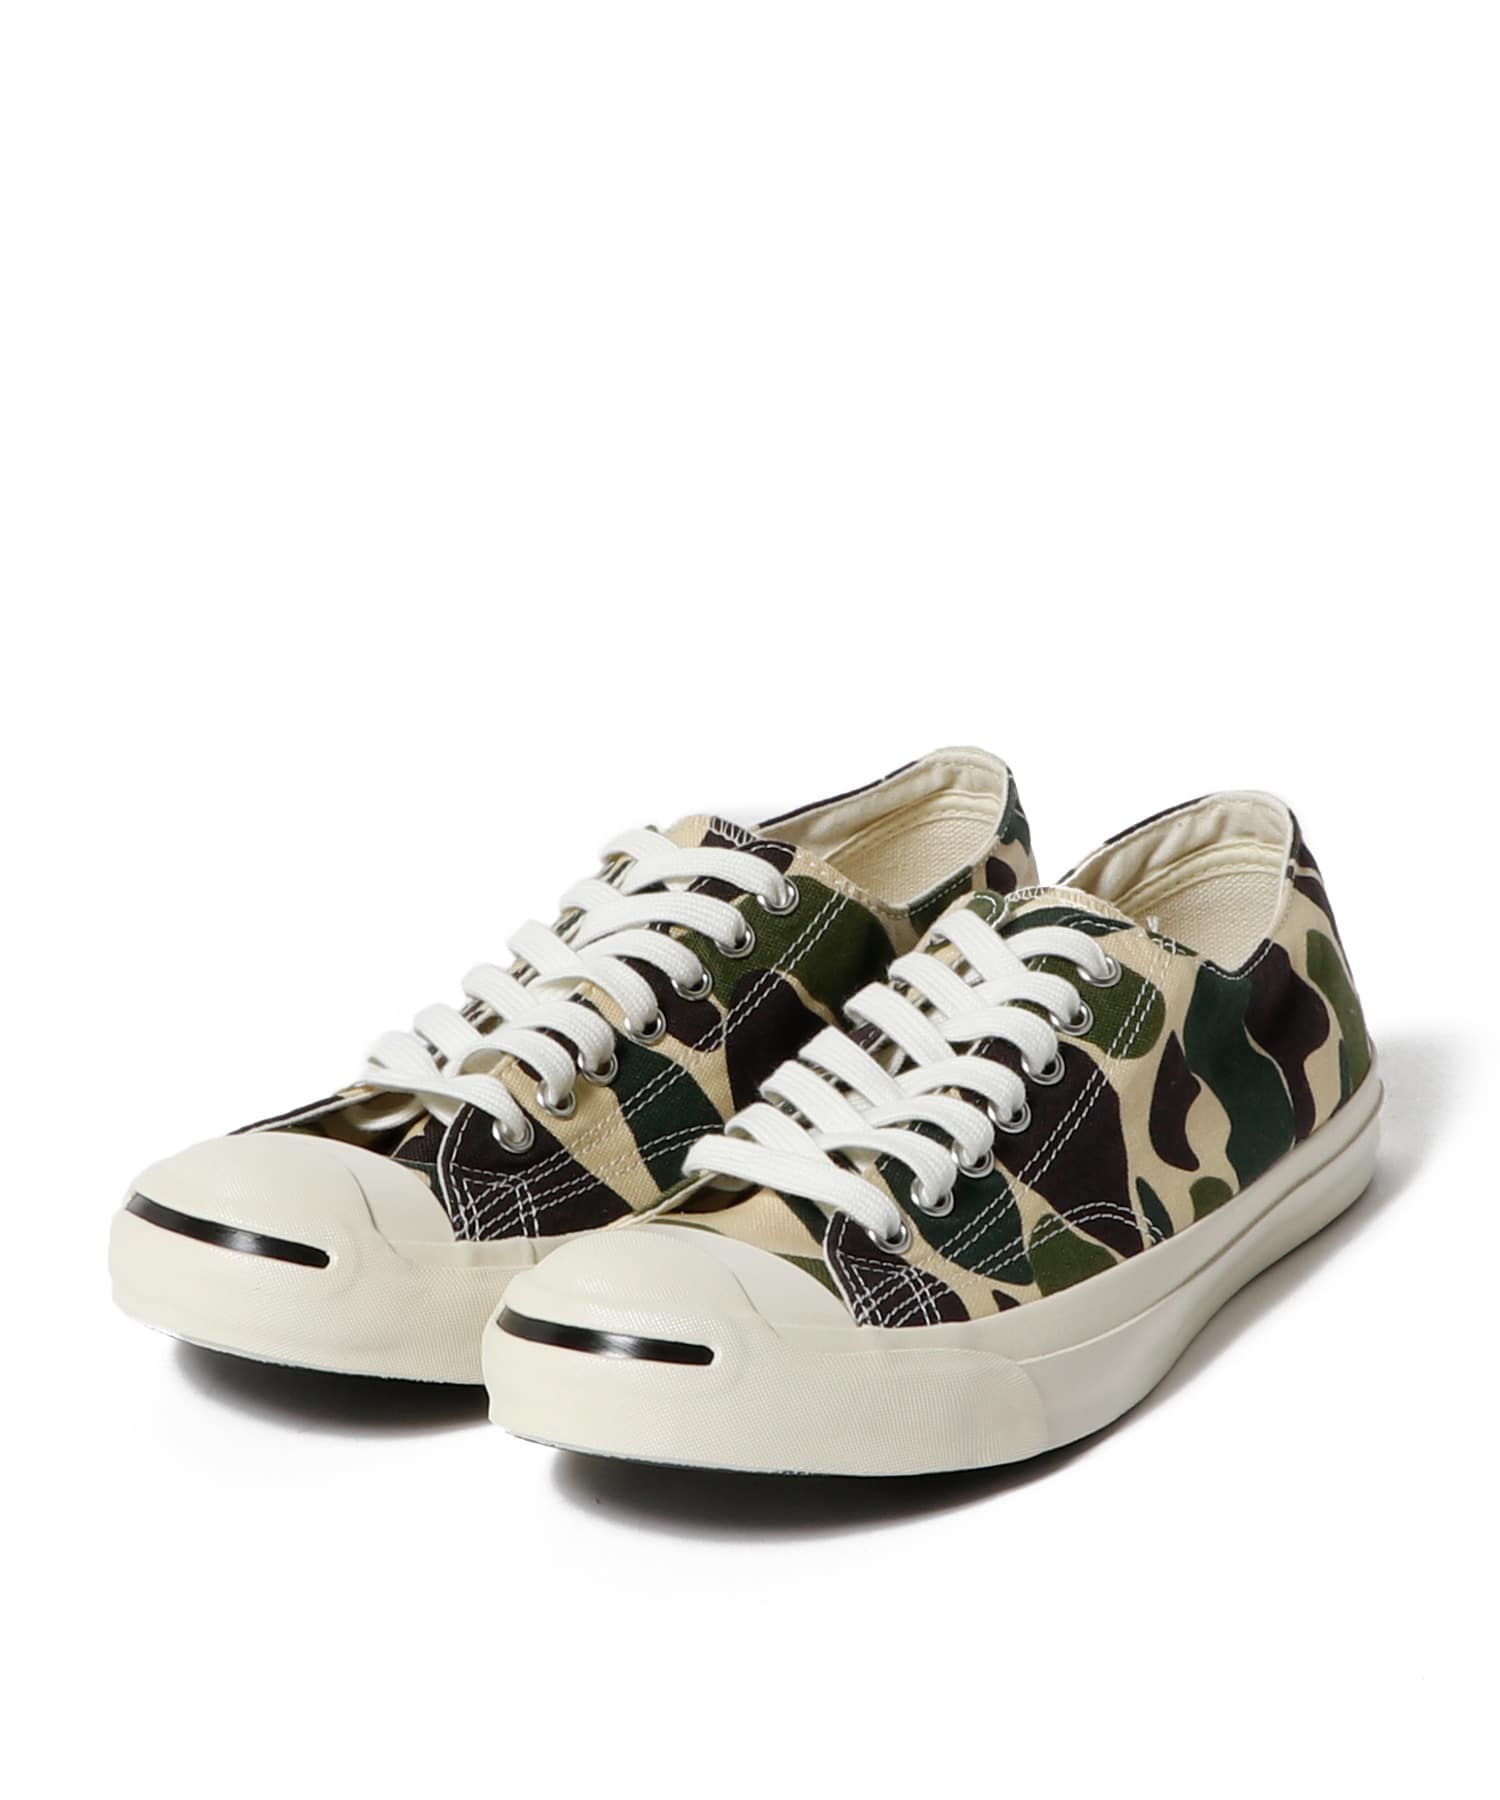 JACK PURCELL US 83CAMO 詳細画像 オリーブ 5